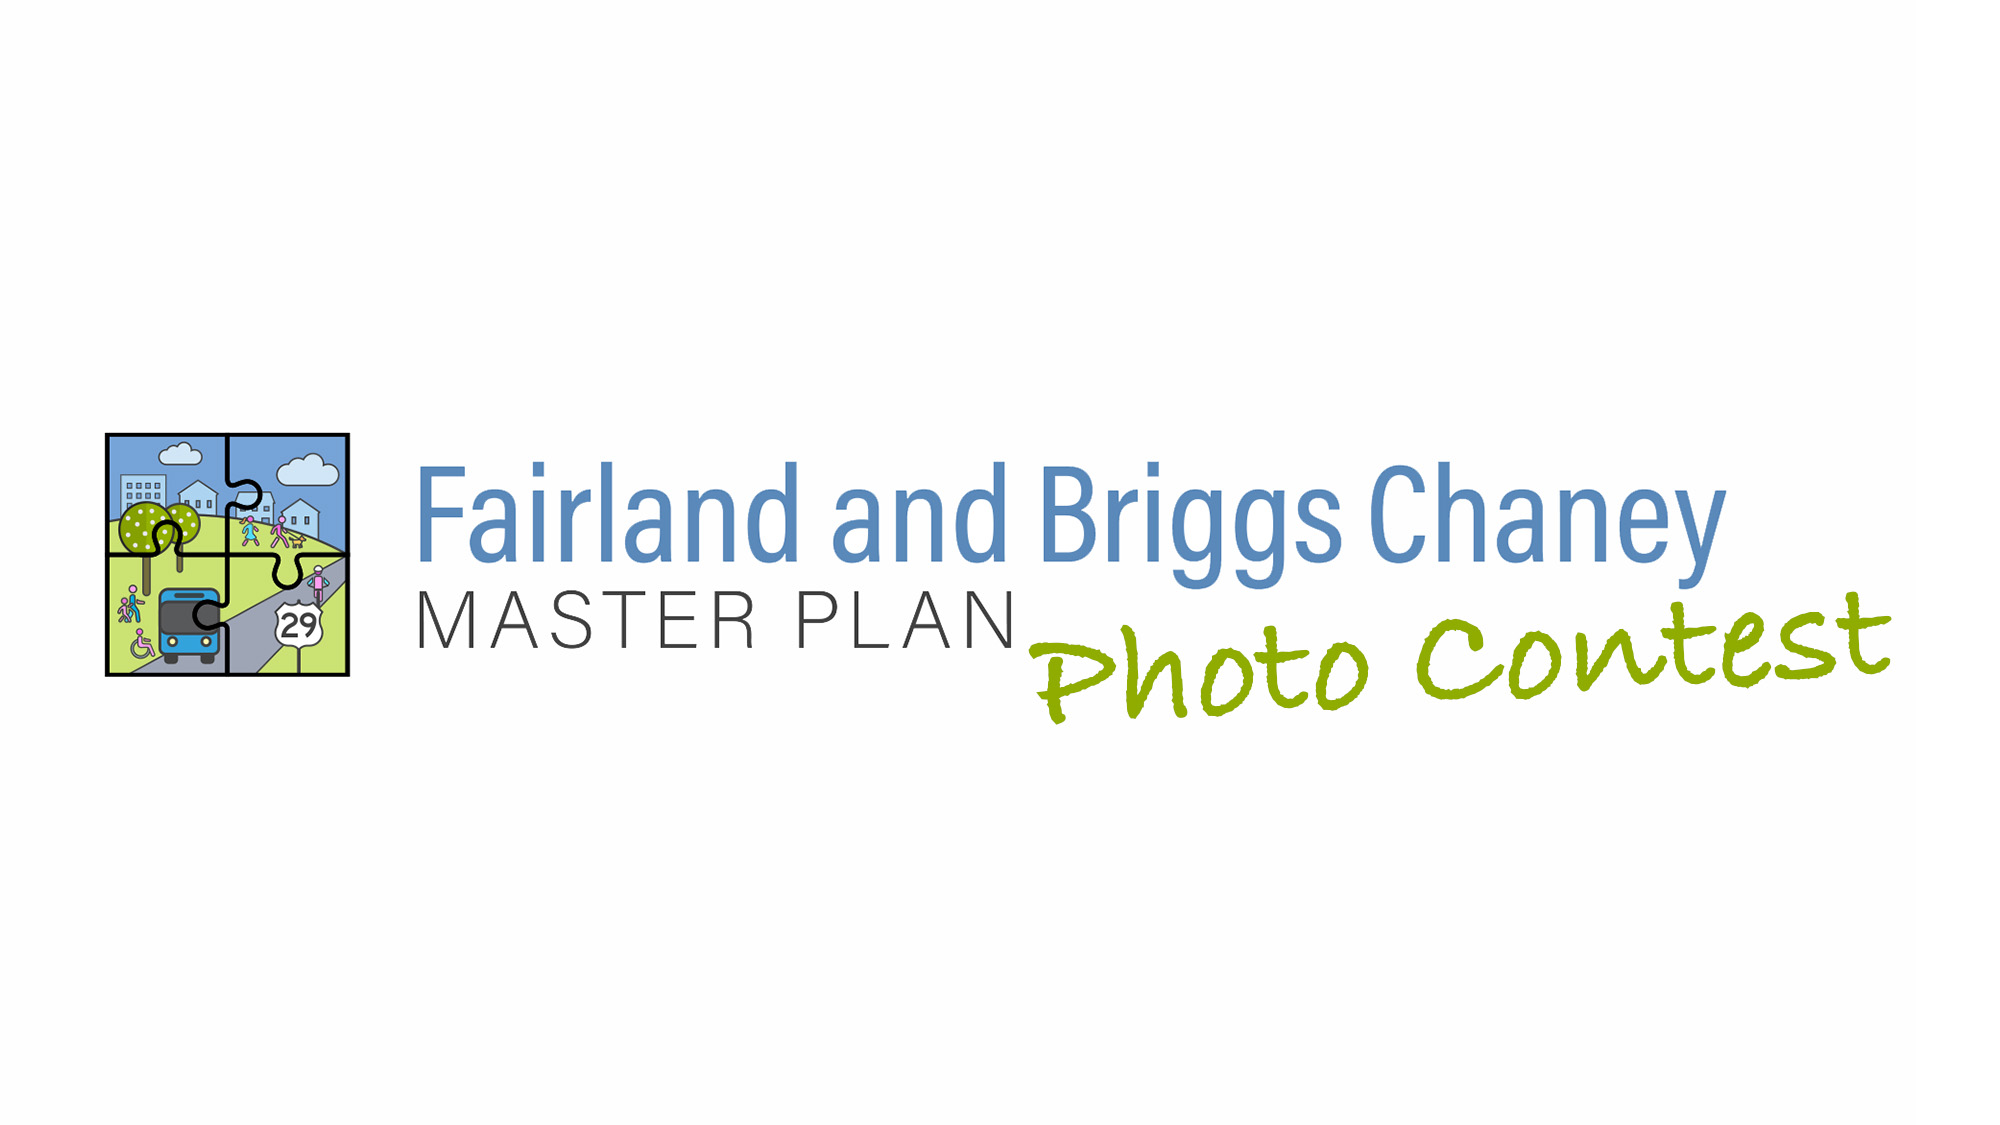 Fairland and Briggs Chaney Master Plan Photo contest